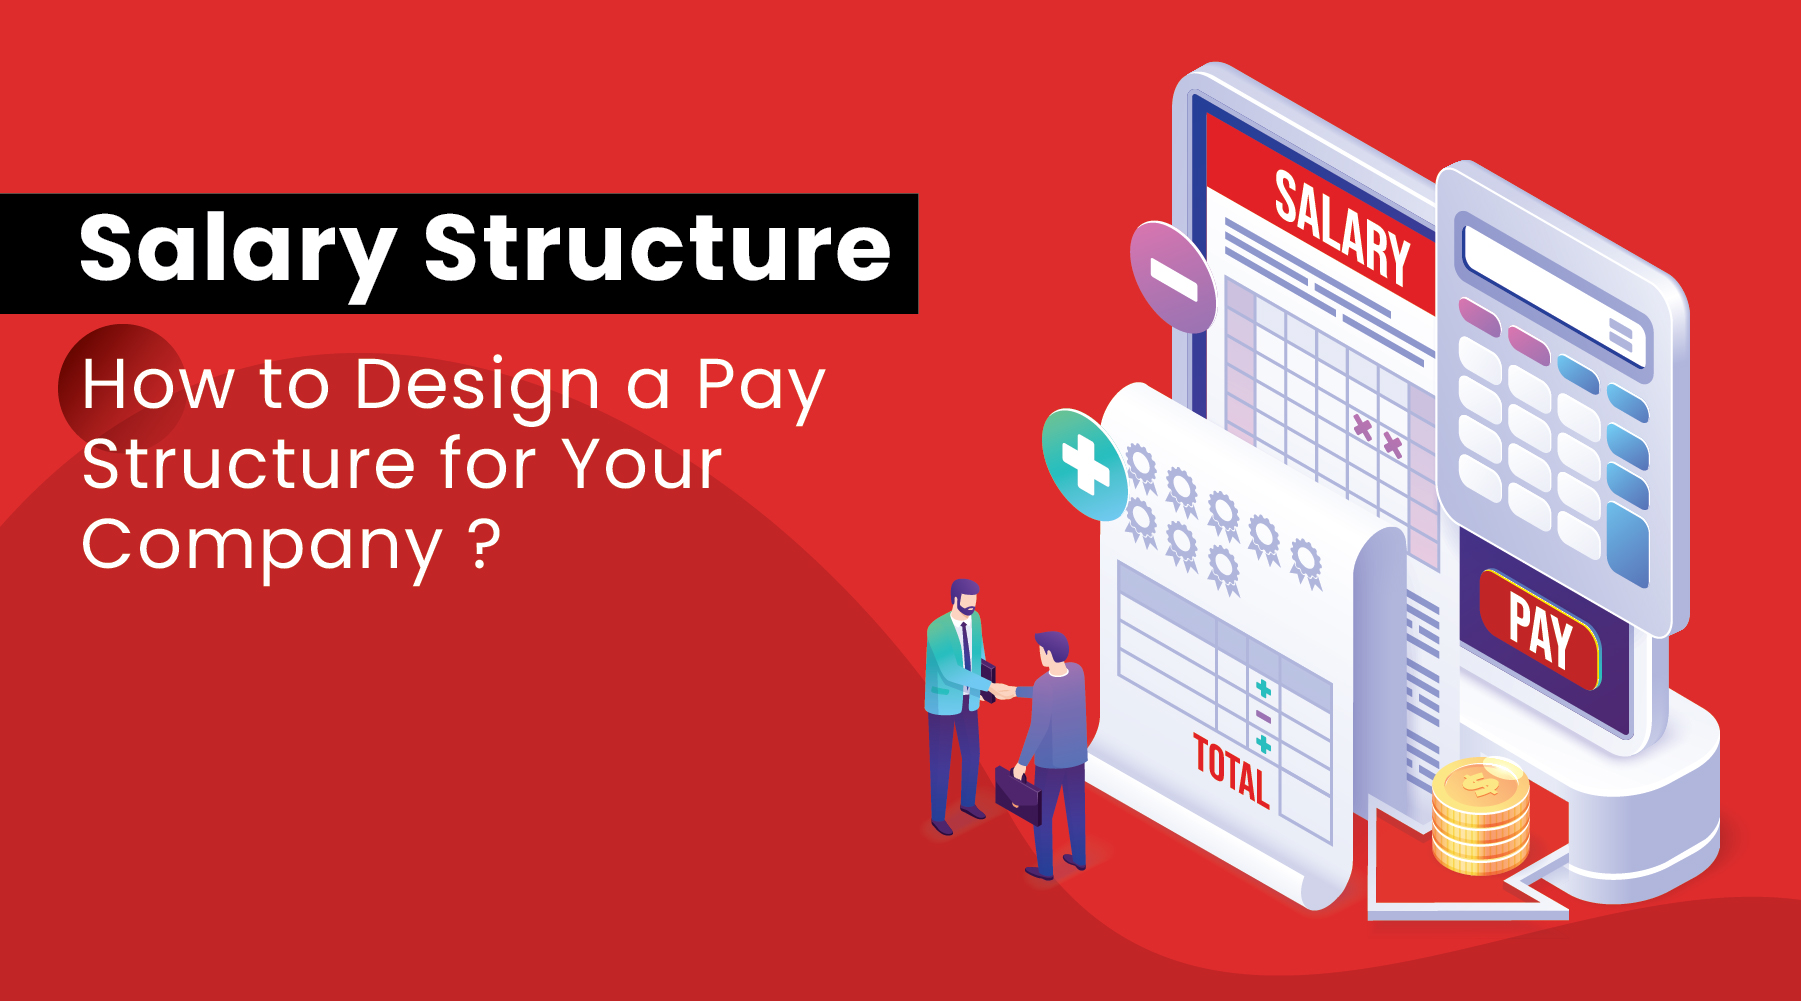 Designing pay structure how to create salary structure